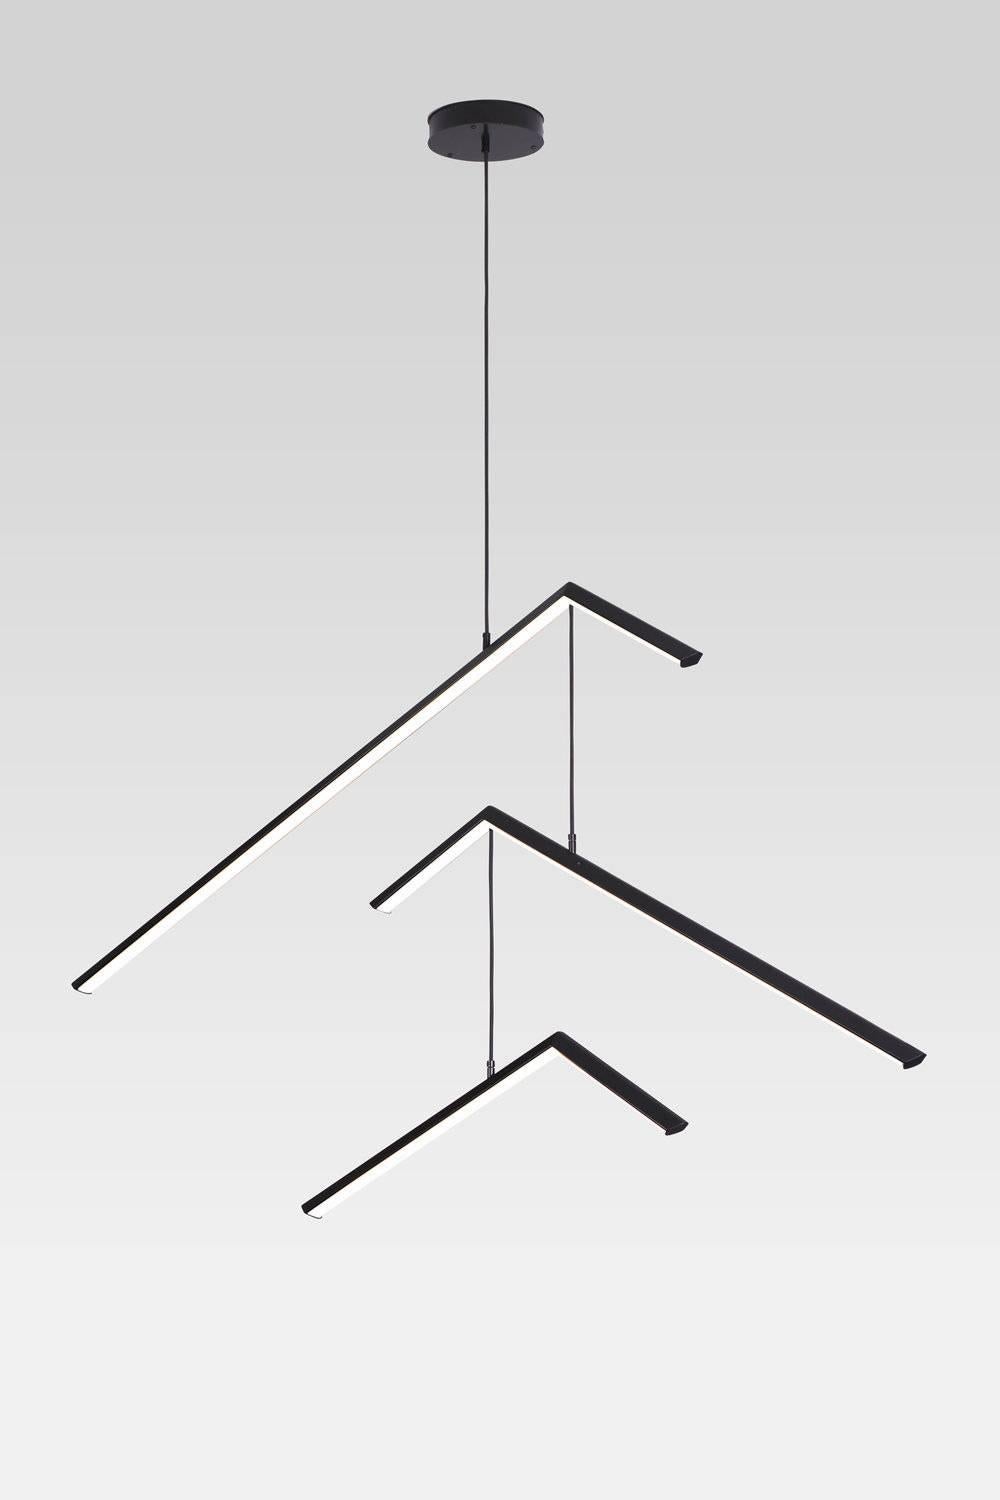 CONCORD is a sculptural mobile chandelier. Three angular bars of continuous light suspend from each other, creating an elegant composition. CONCORD adds a dynamic sense of balance and tension in open architectural spaces.

METAL FINISH
Powder-coat